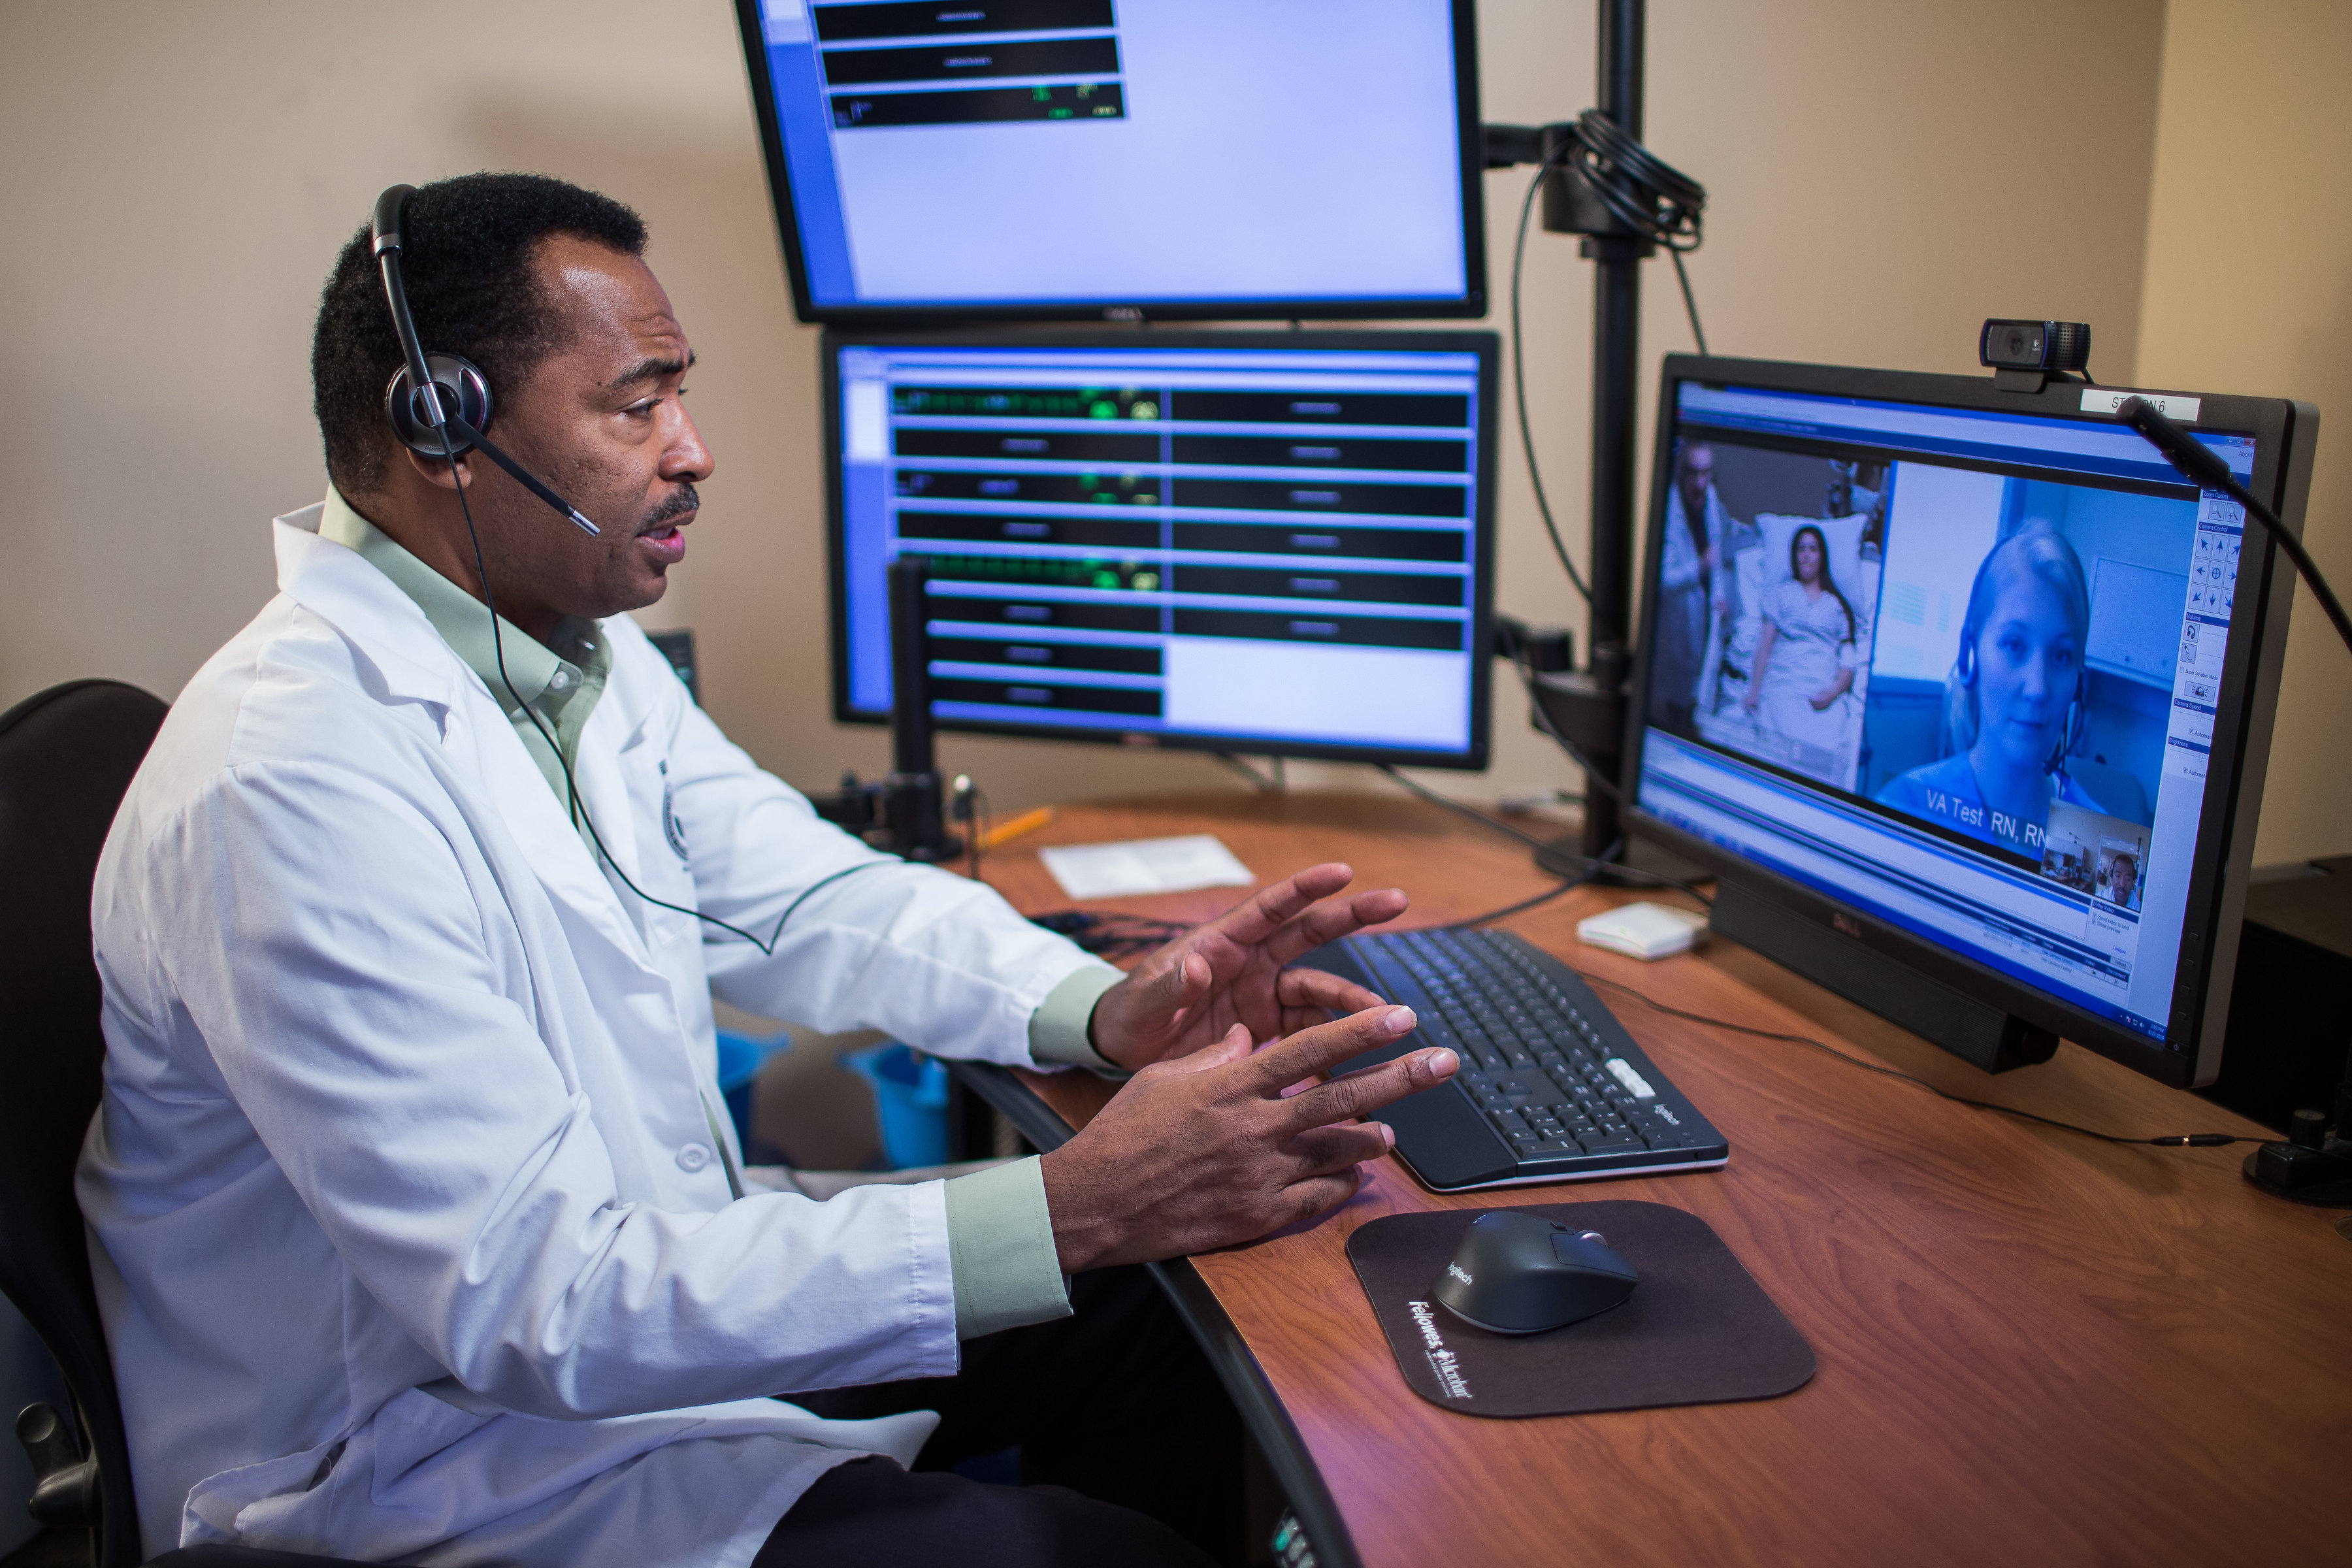 Black male provider sits in front of monitor with patient in ICU on the screen